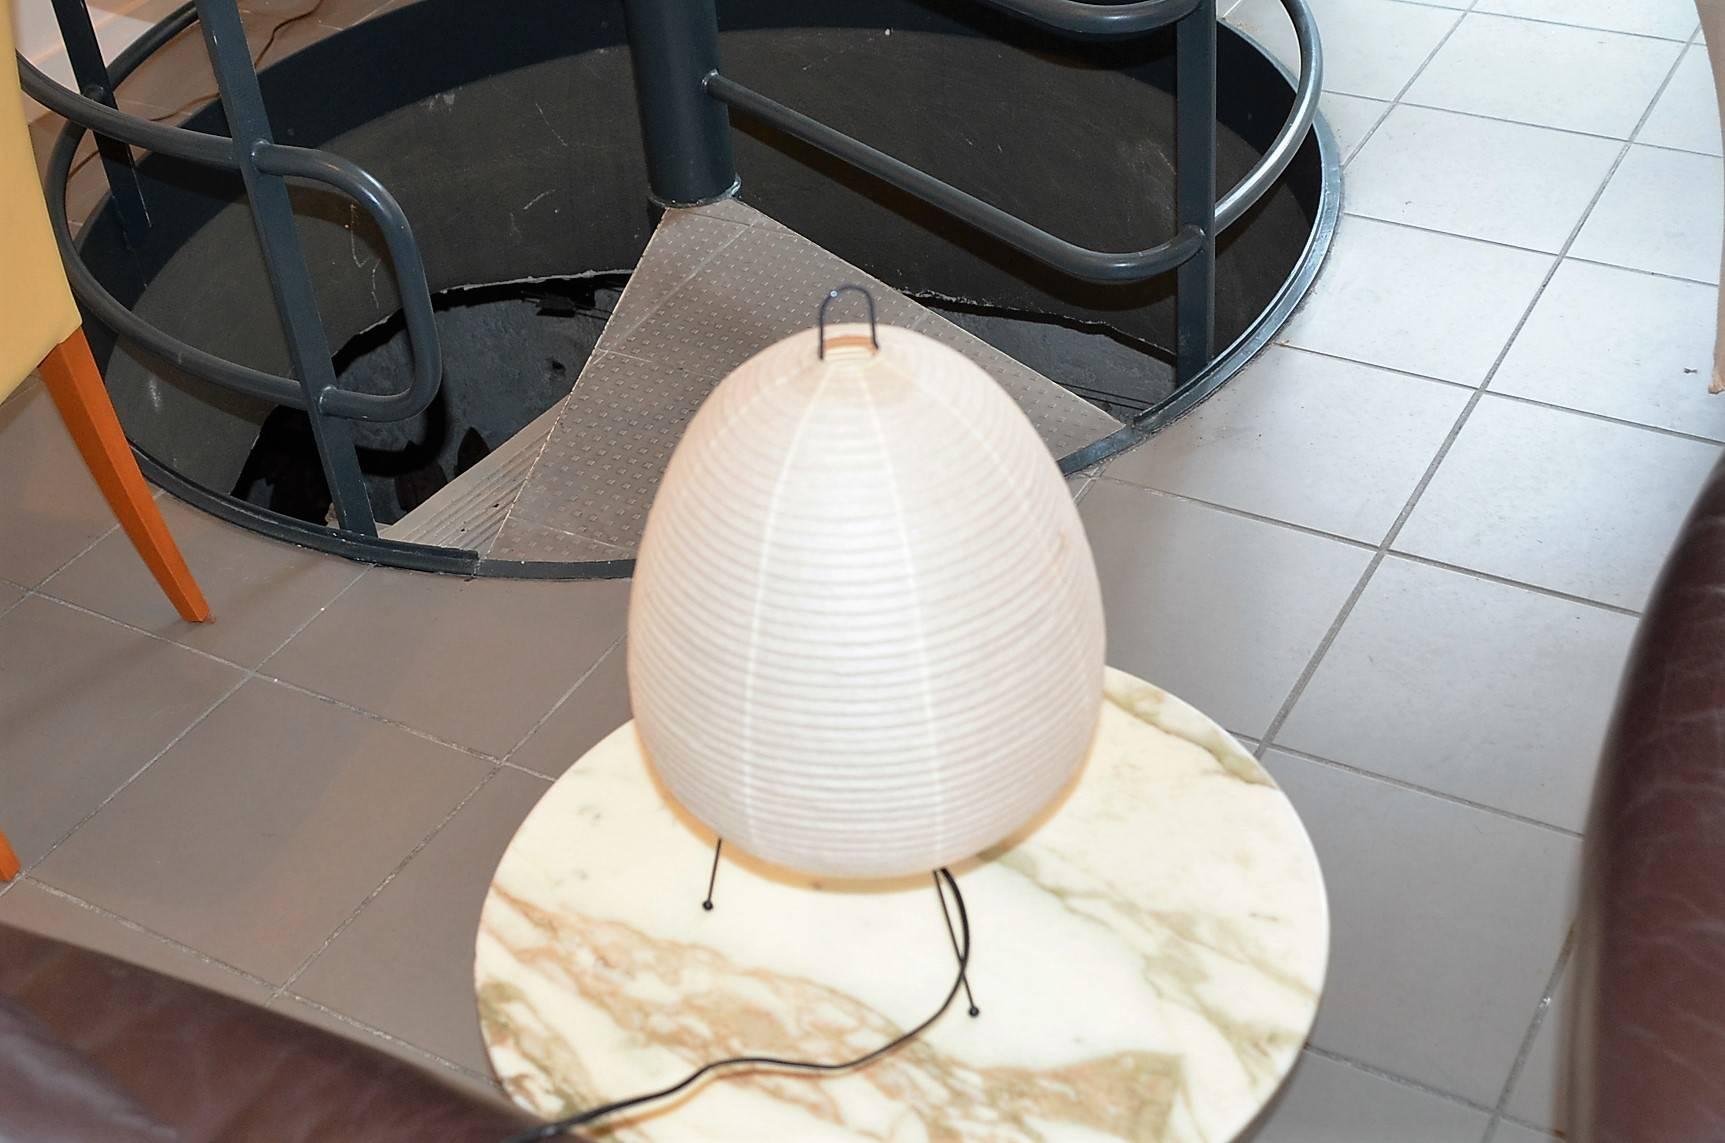 The Isamu Noguchi Akari lamp -inspired by the traditional Japanese paper lanterns- is one of the design icons of the last century.

The Isamu Noguchi Akari lamp reminds the traditional lantern in all the parts and materials used, it’s made of